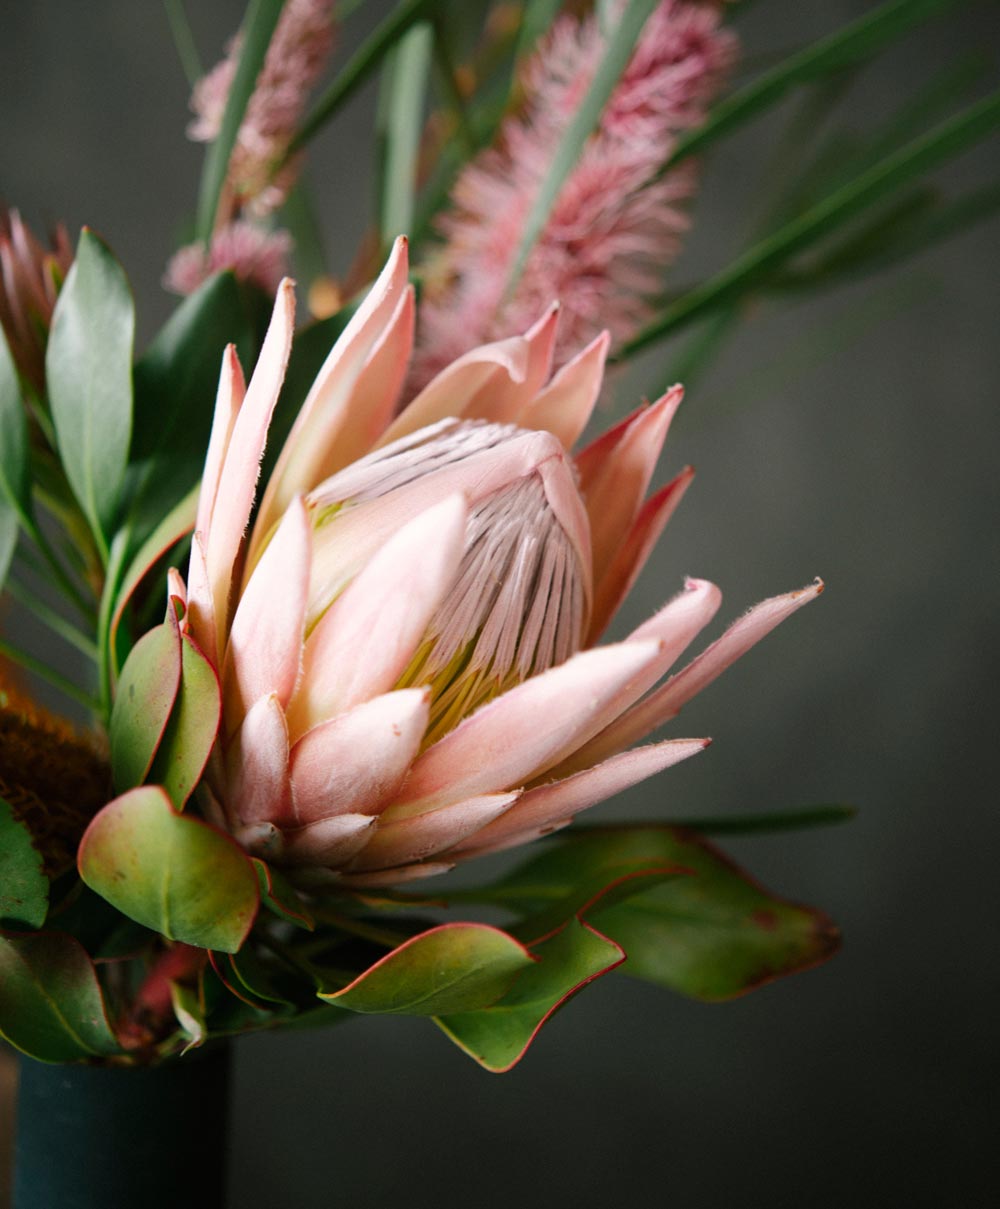 This photograph depicts a close-up view of a pink protea flower against a grey background.